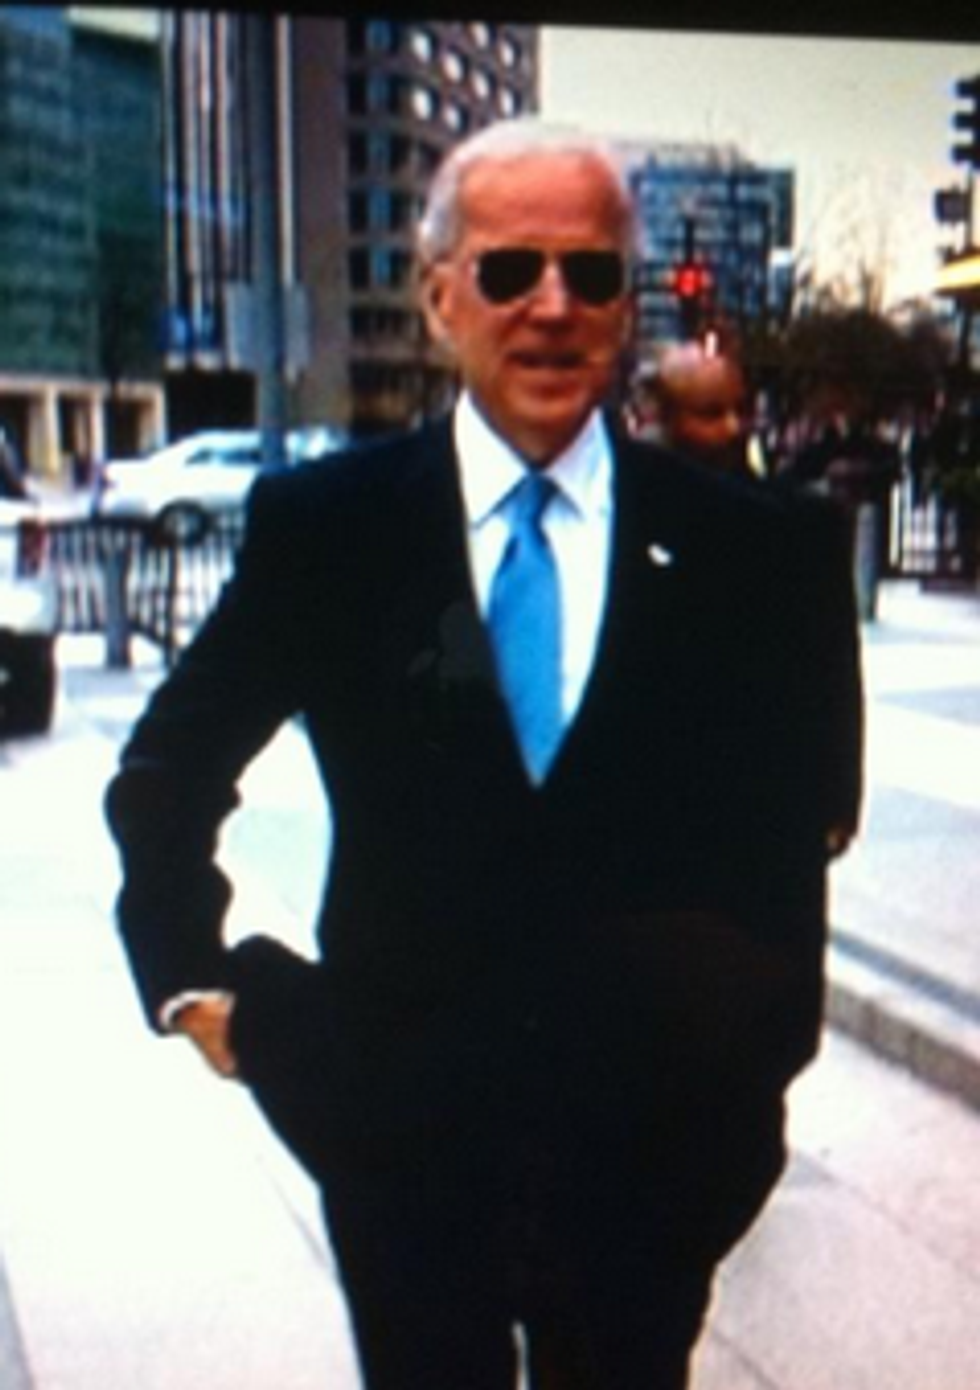 Old Handsome Joe Biden Has Ten Percent Chance Of Becoming Earth's Most Important Human Tonight